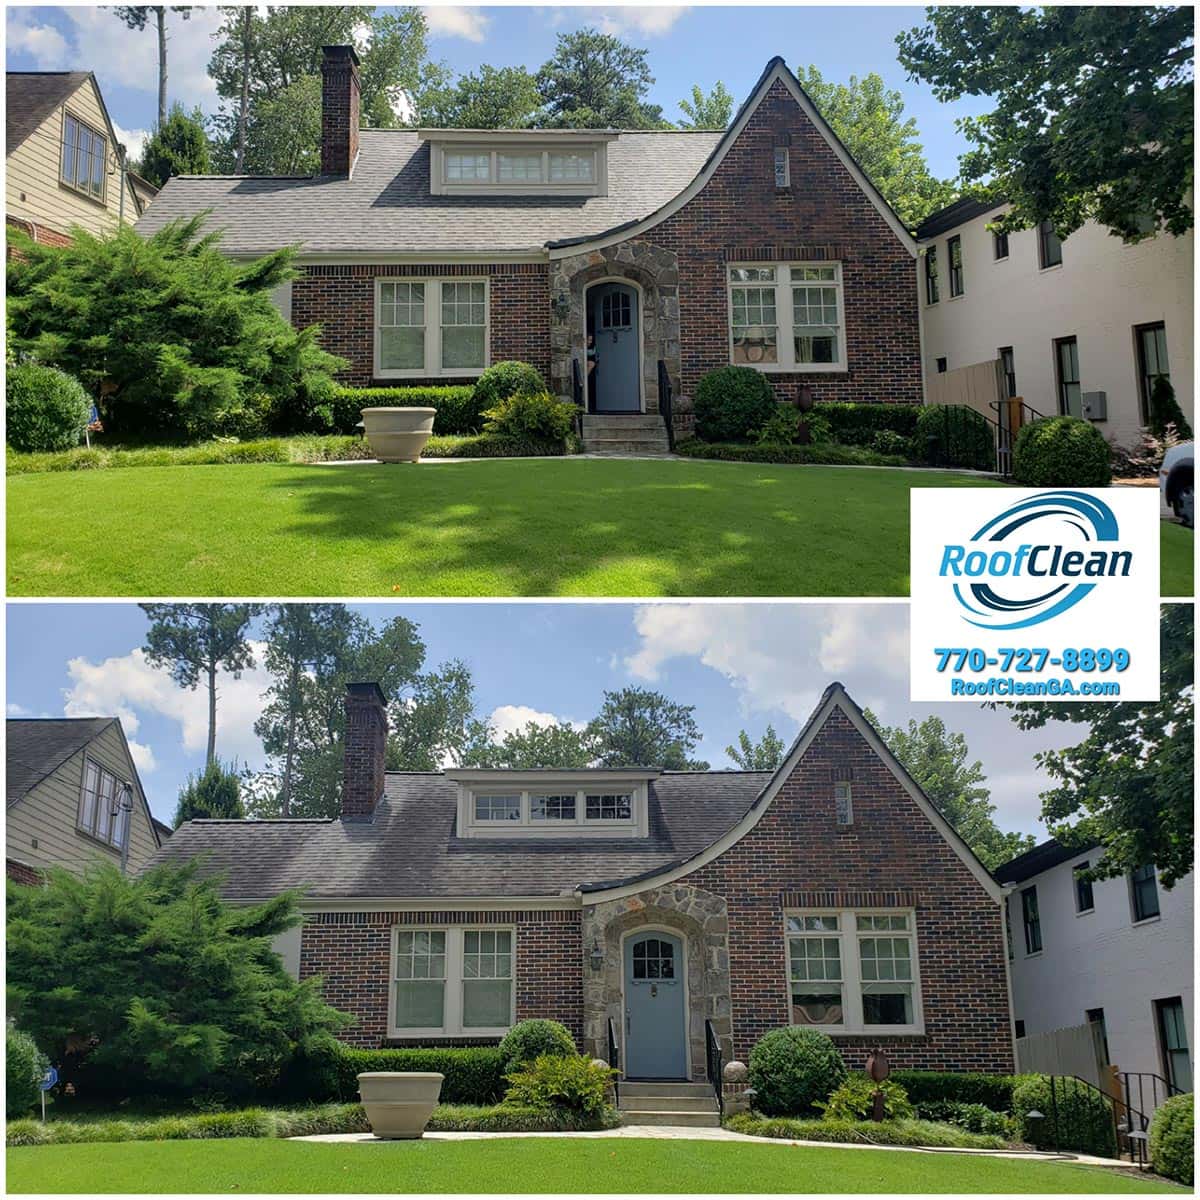 Unique Roof Cleaning on Yorkshire Rd NE in Atlanta GA Main